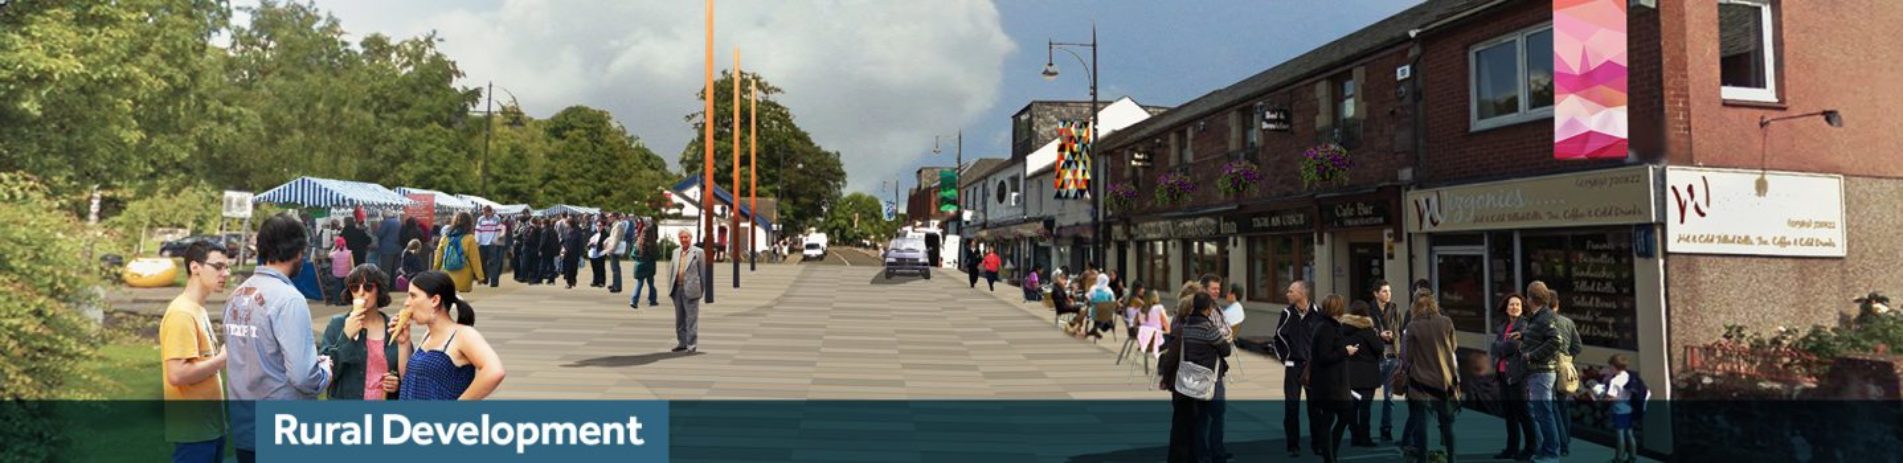 graphic-vision-of-balloch-main-street-very-few-cars-visible-groups-of-people-prominent-as-well-as-stalls-on-the-left-with-blue-banner-underneath-reading-rural-development